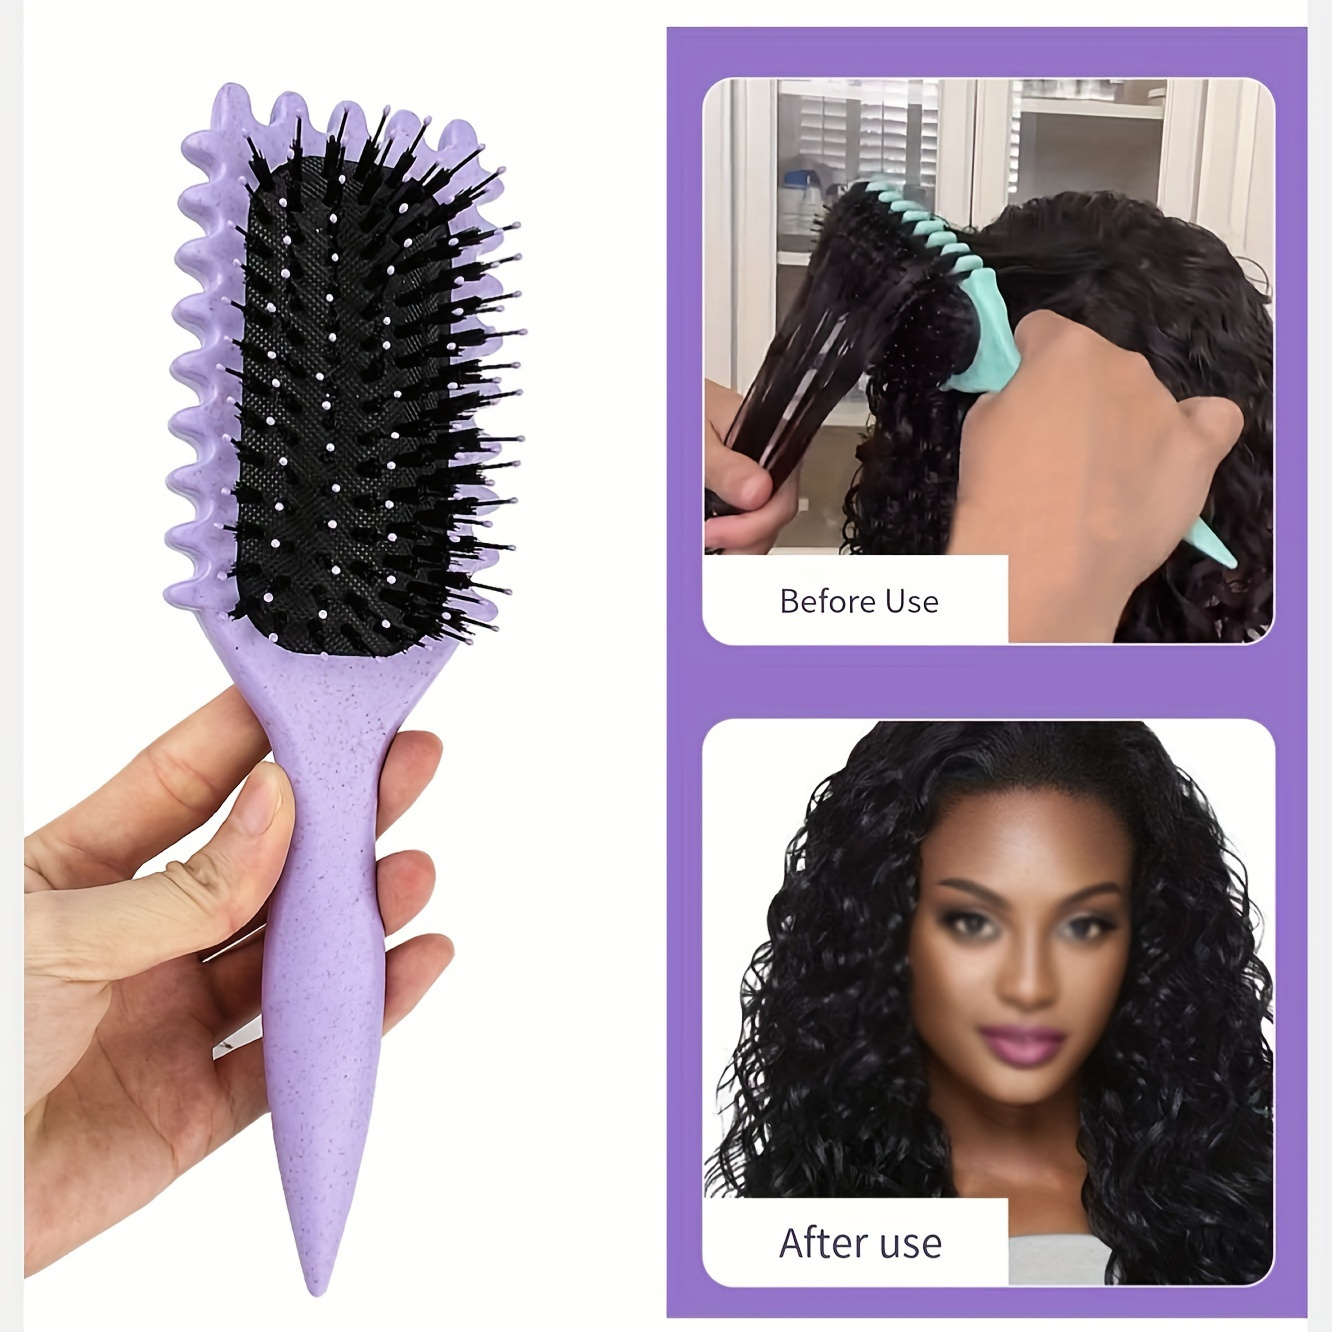 

Detangling Spring Styling Brush, Flexible Bristle Hairbrush For Curly Hair, Gentle Grip Design, Hair Care Tool For Defined Curls, Ideal Gift For Women